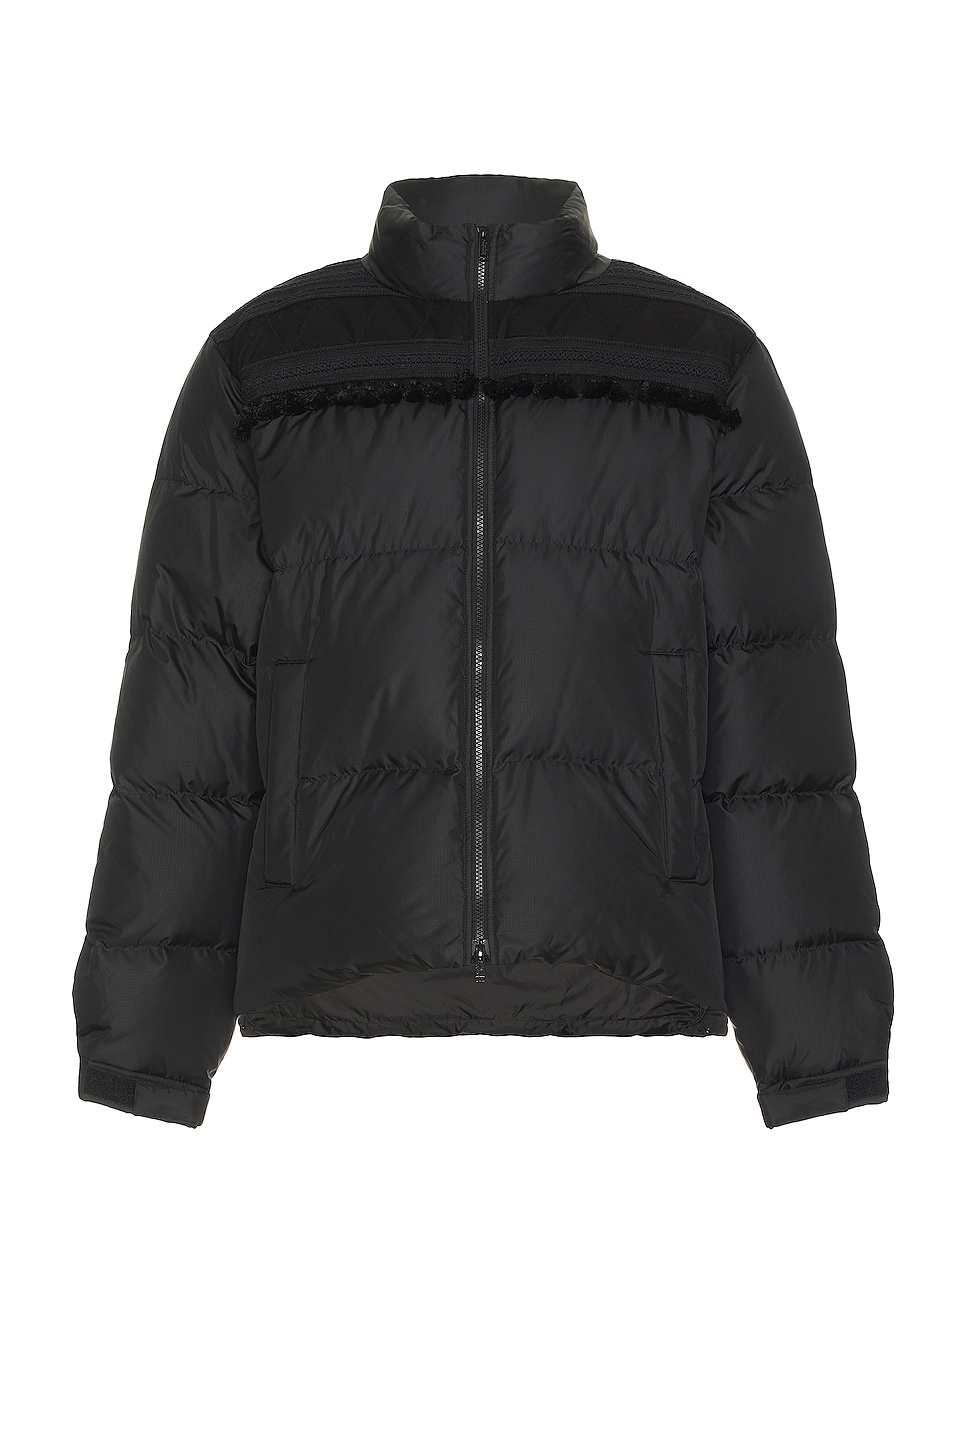 Image 1 of Undercover Puffer Jacket in Black